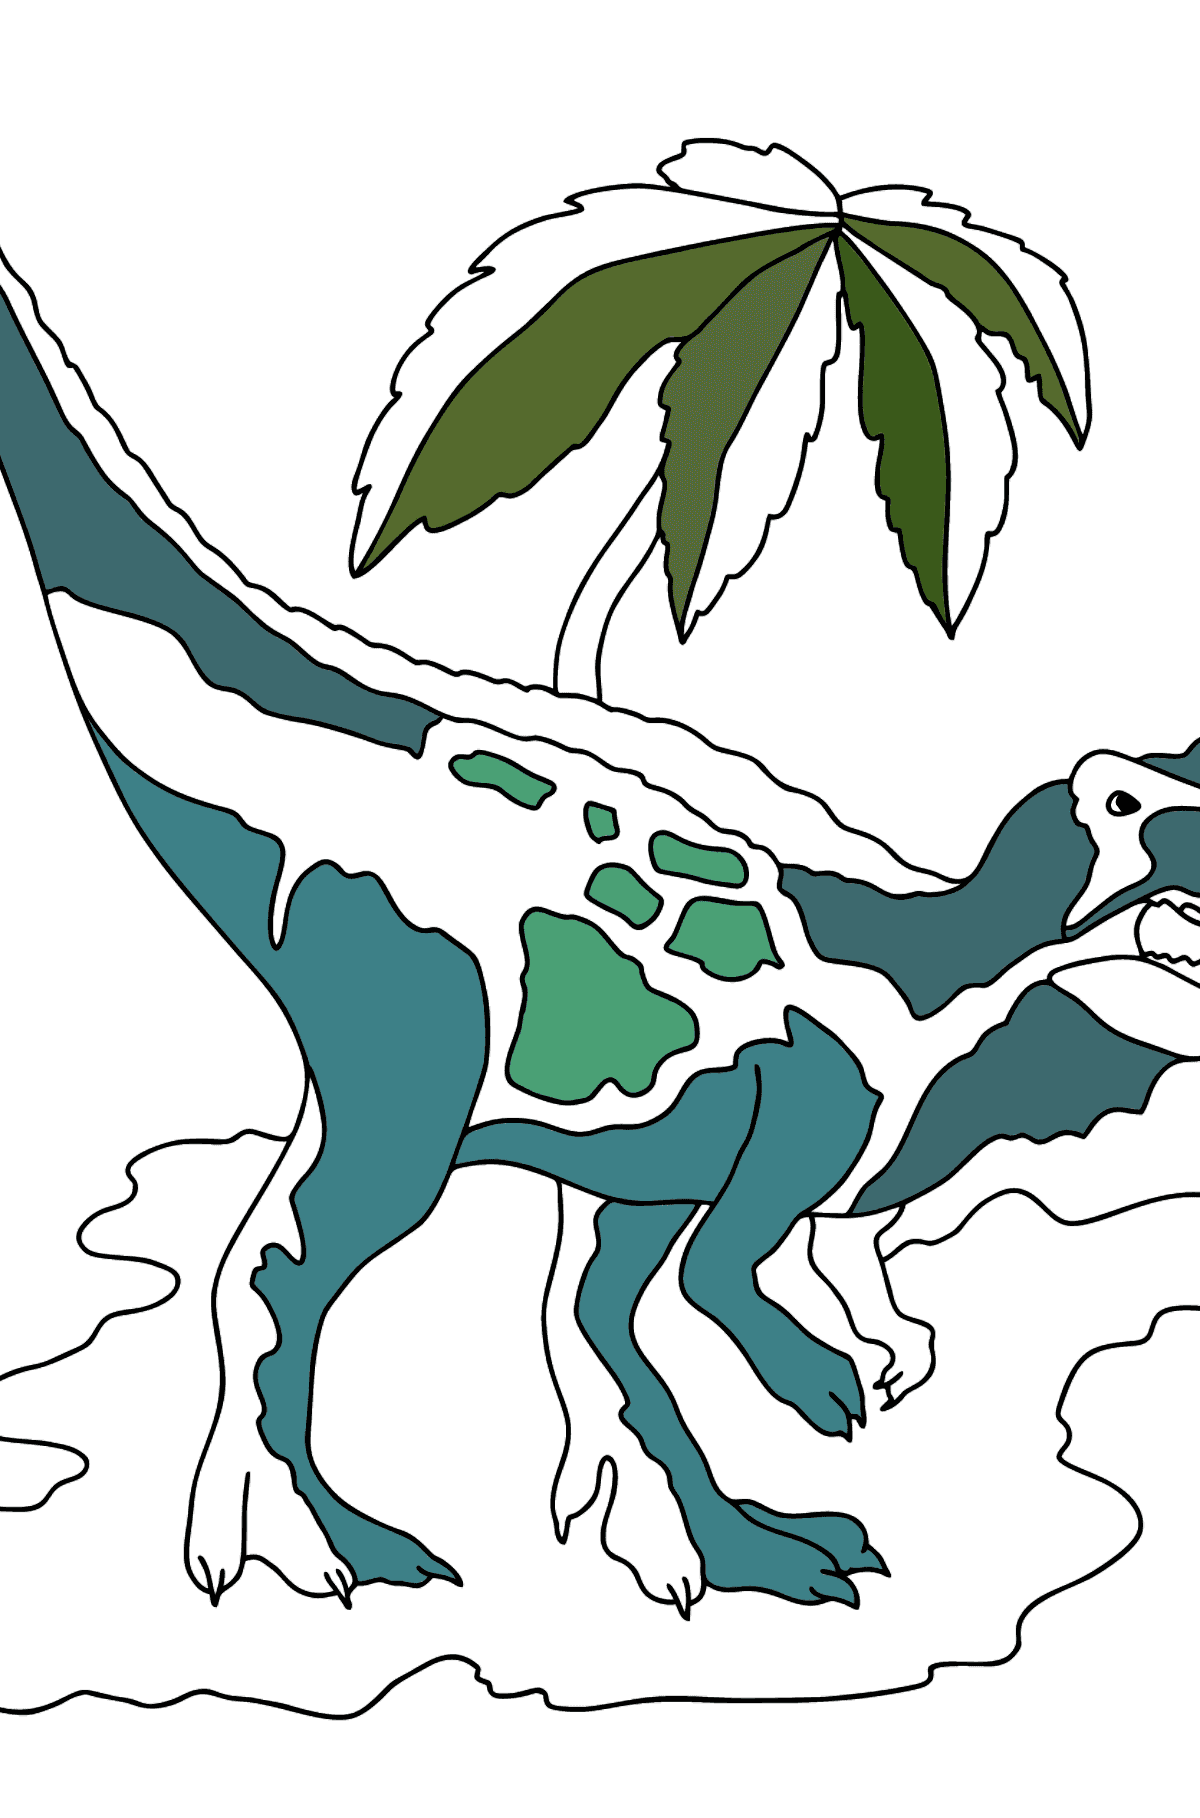 Coloring Page - Tyrannosaurus - The King of Dinosaurs - Coloring Pages for Kids